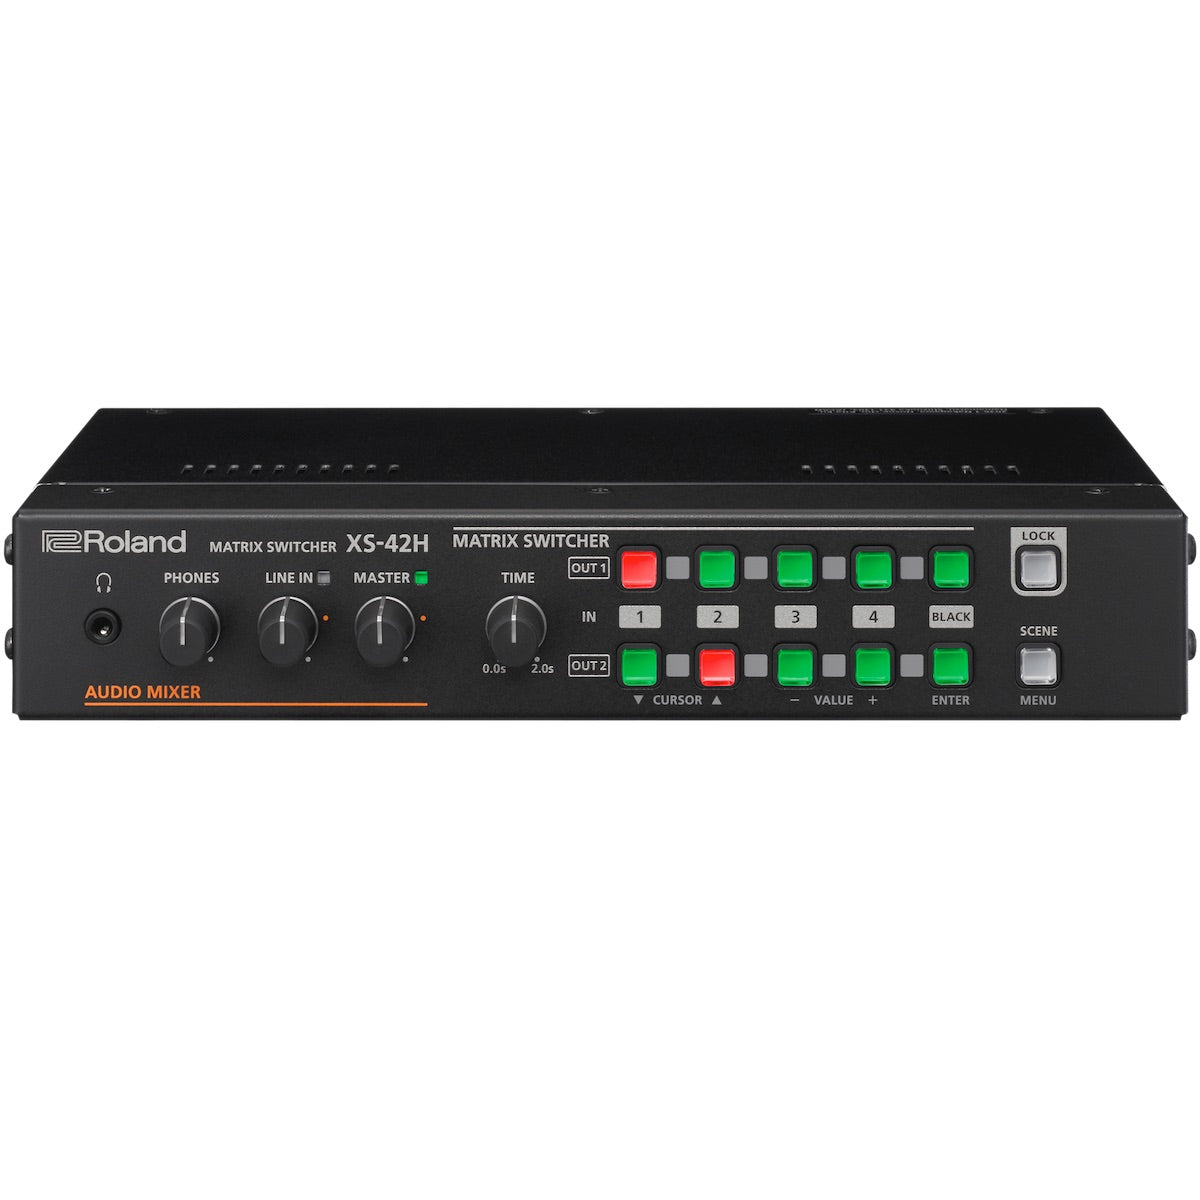 Roland XS-42H - Multi-Format AV Matrix Switcher with 4-in x 2-out